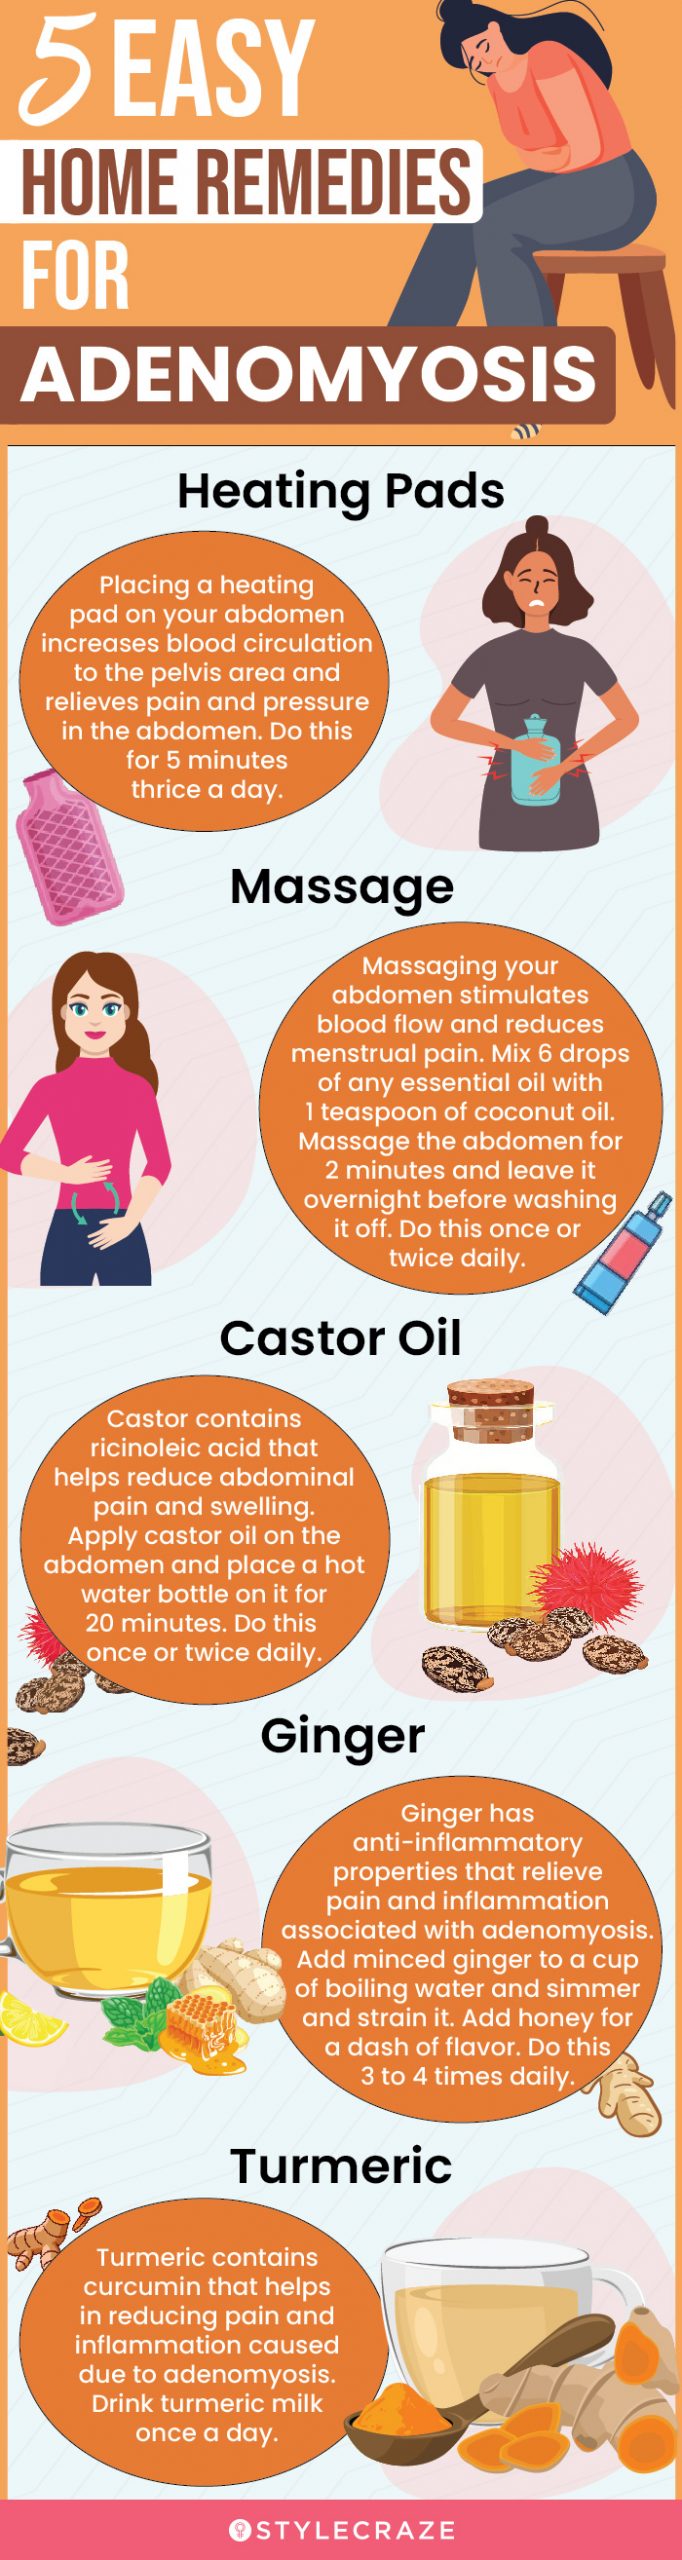 5 easy home remedies for adenomyosis [infographic]